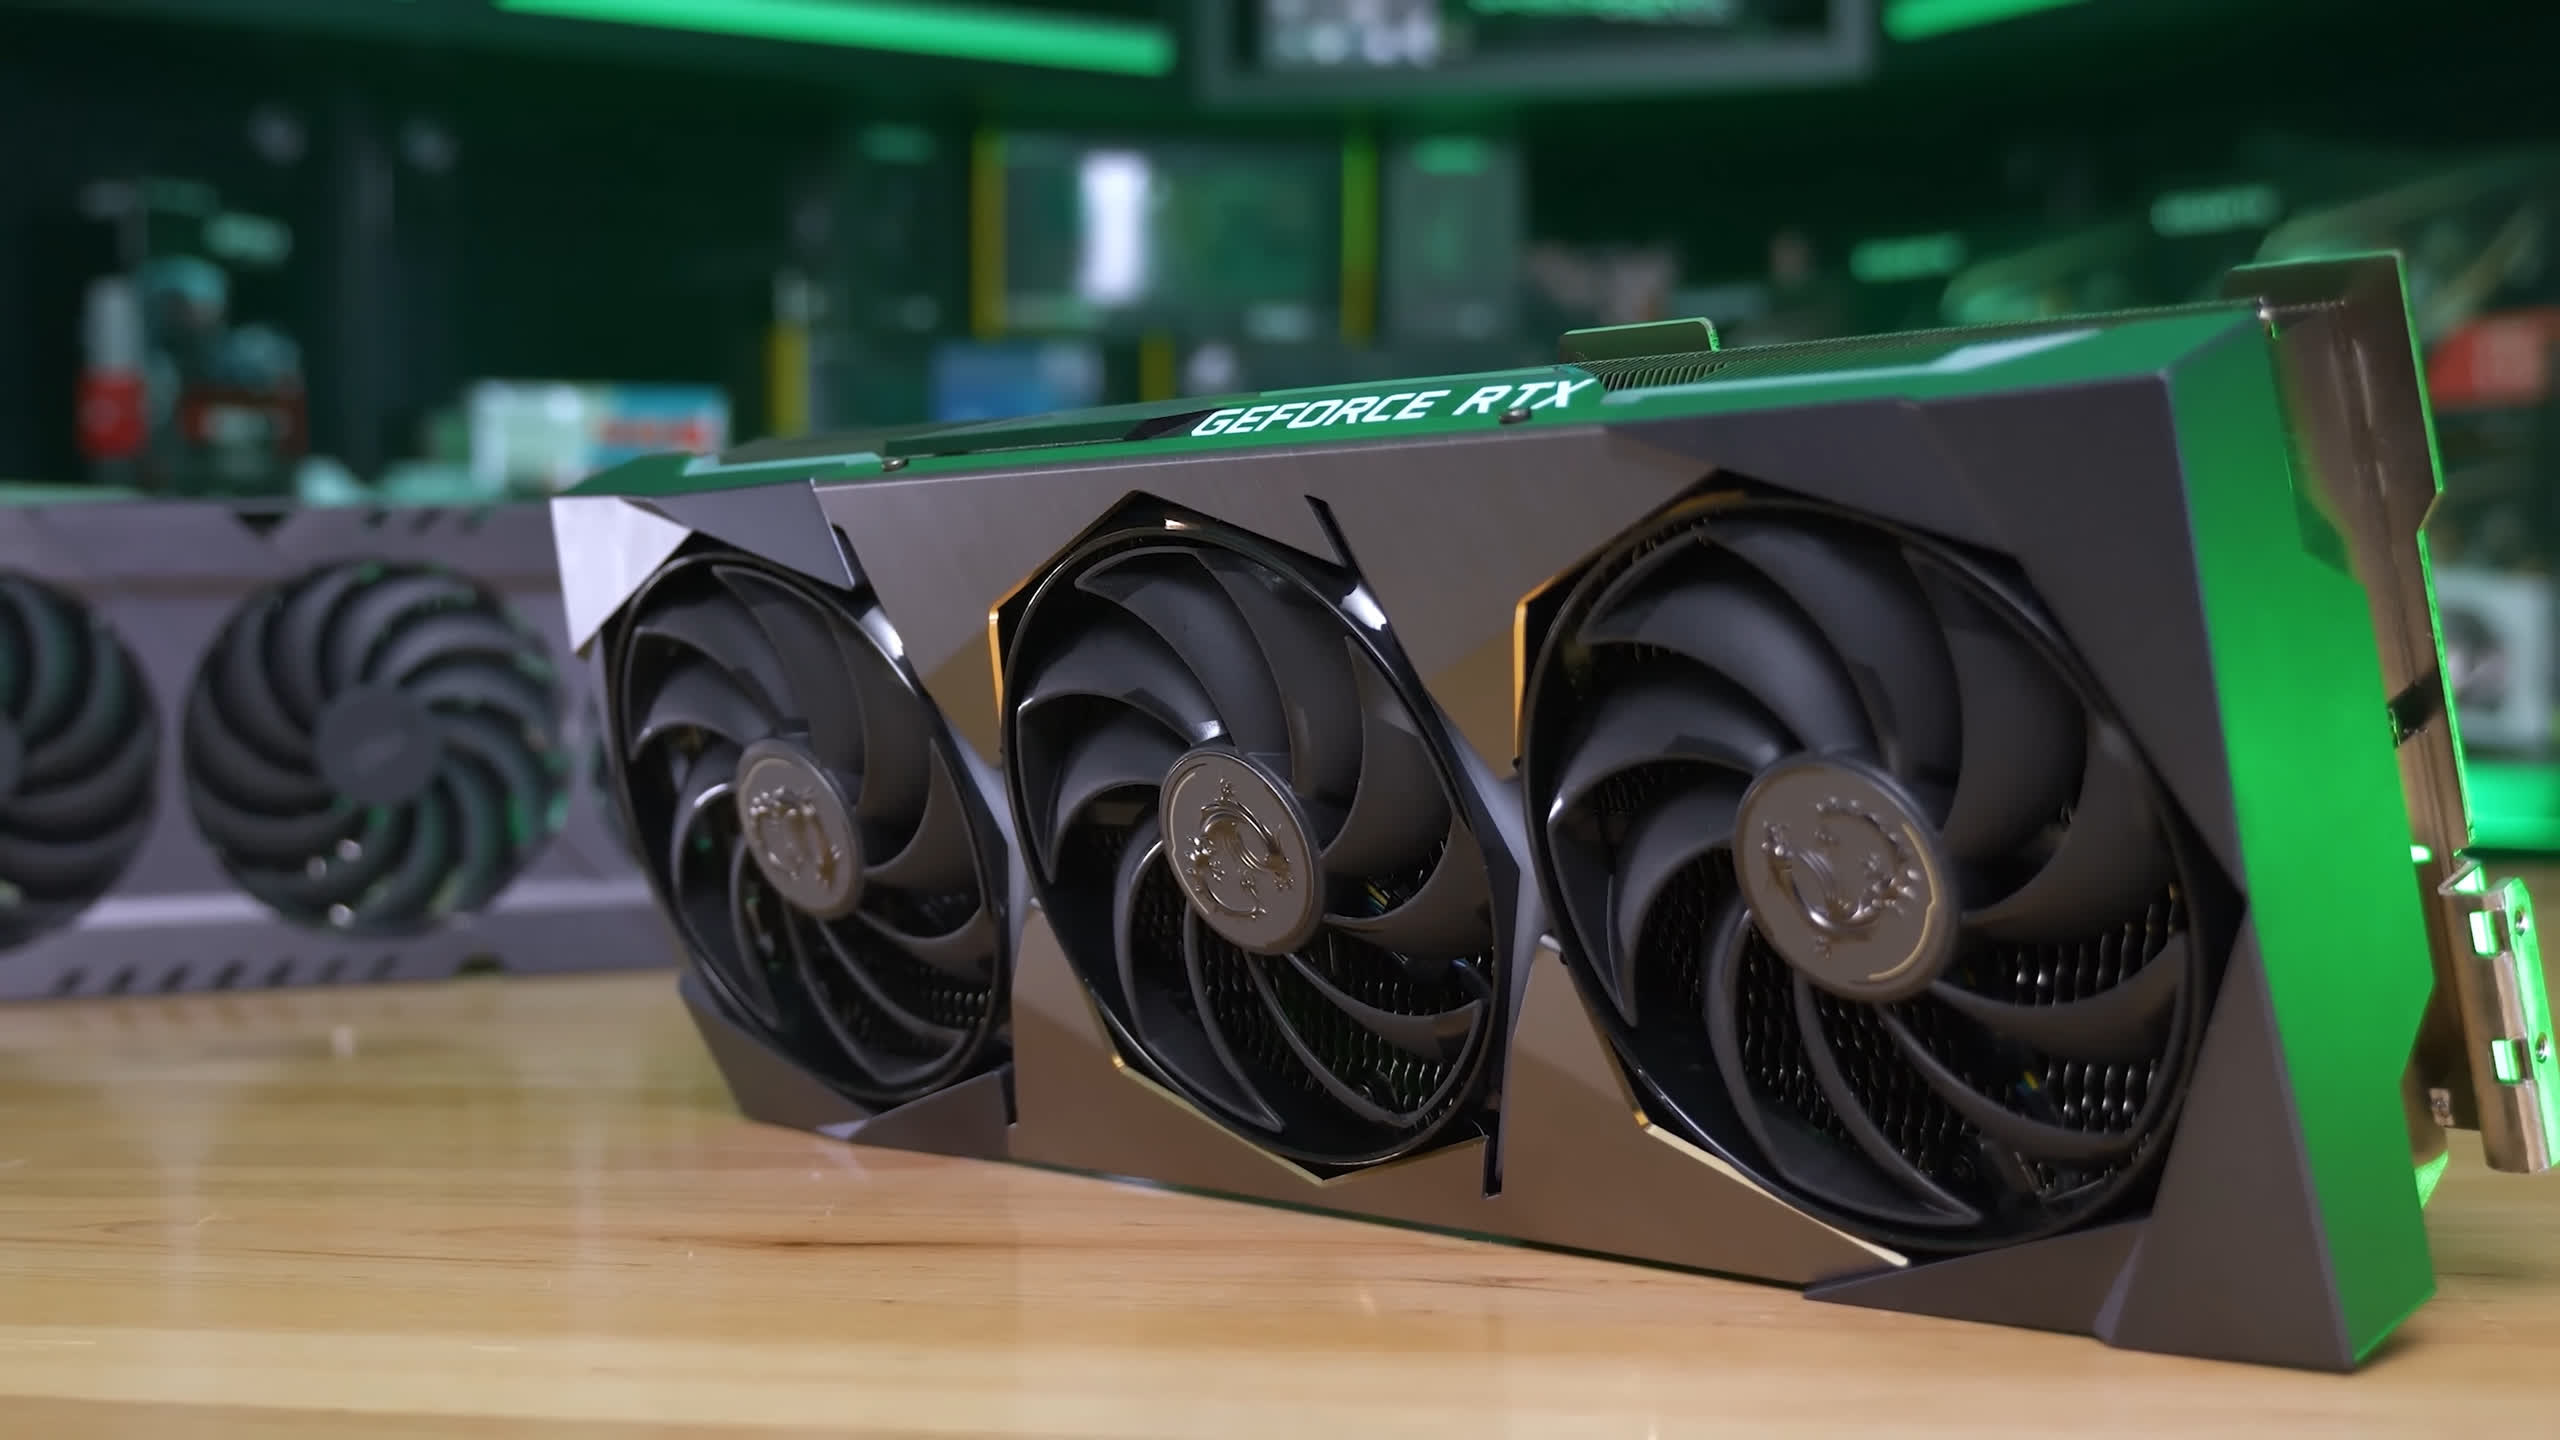 Chinese retailers and cryptominers are desperate to sell GPUs before prices crash to normal levels